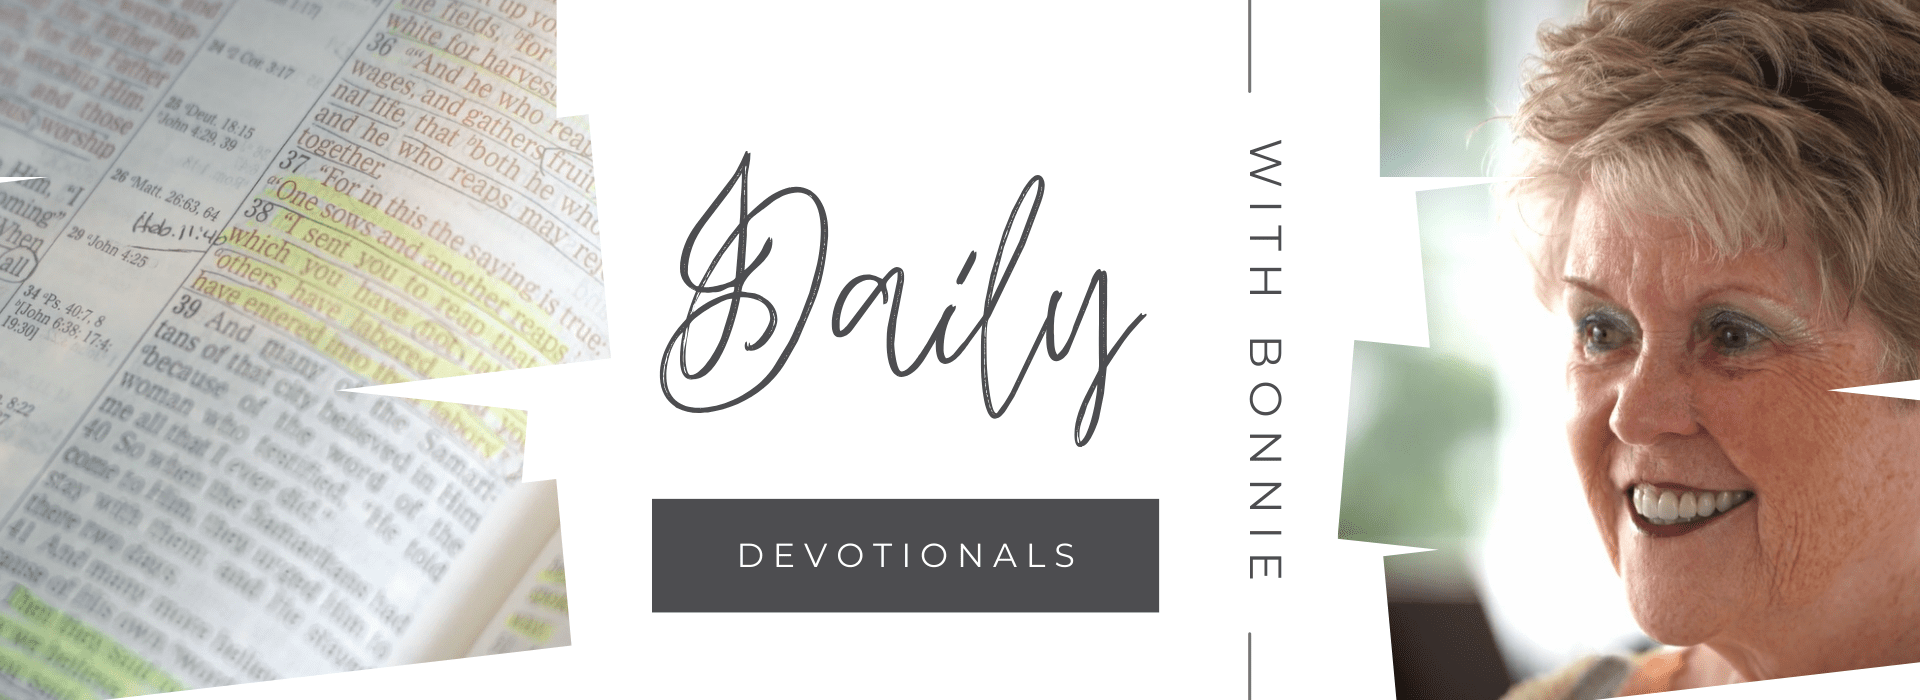 A black and white image of the words daily devotionals with bonnie.